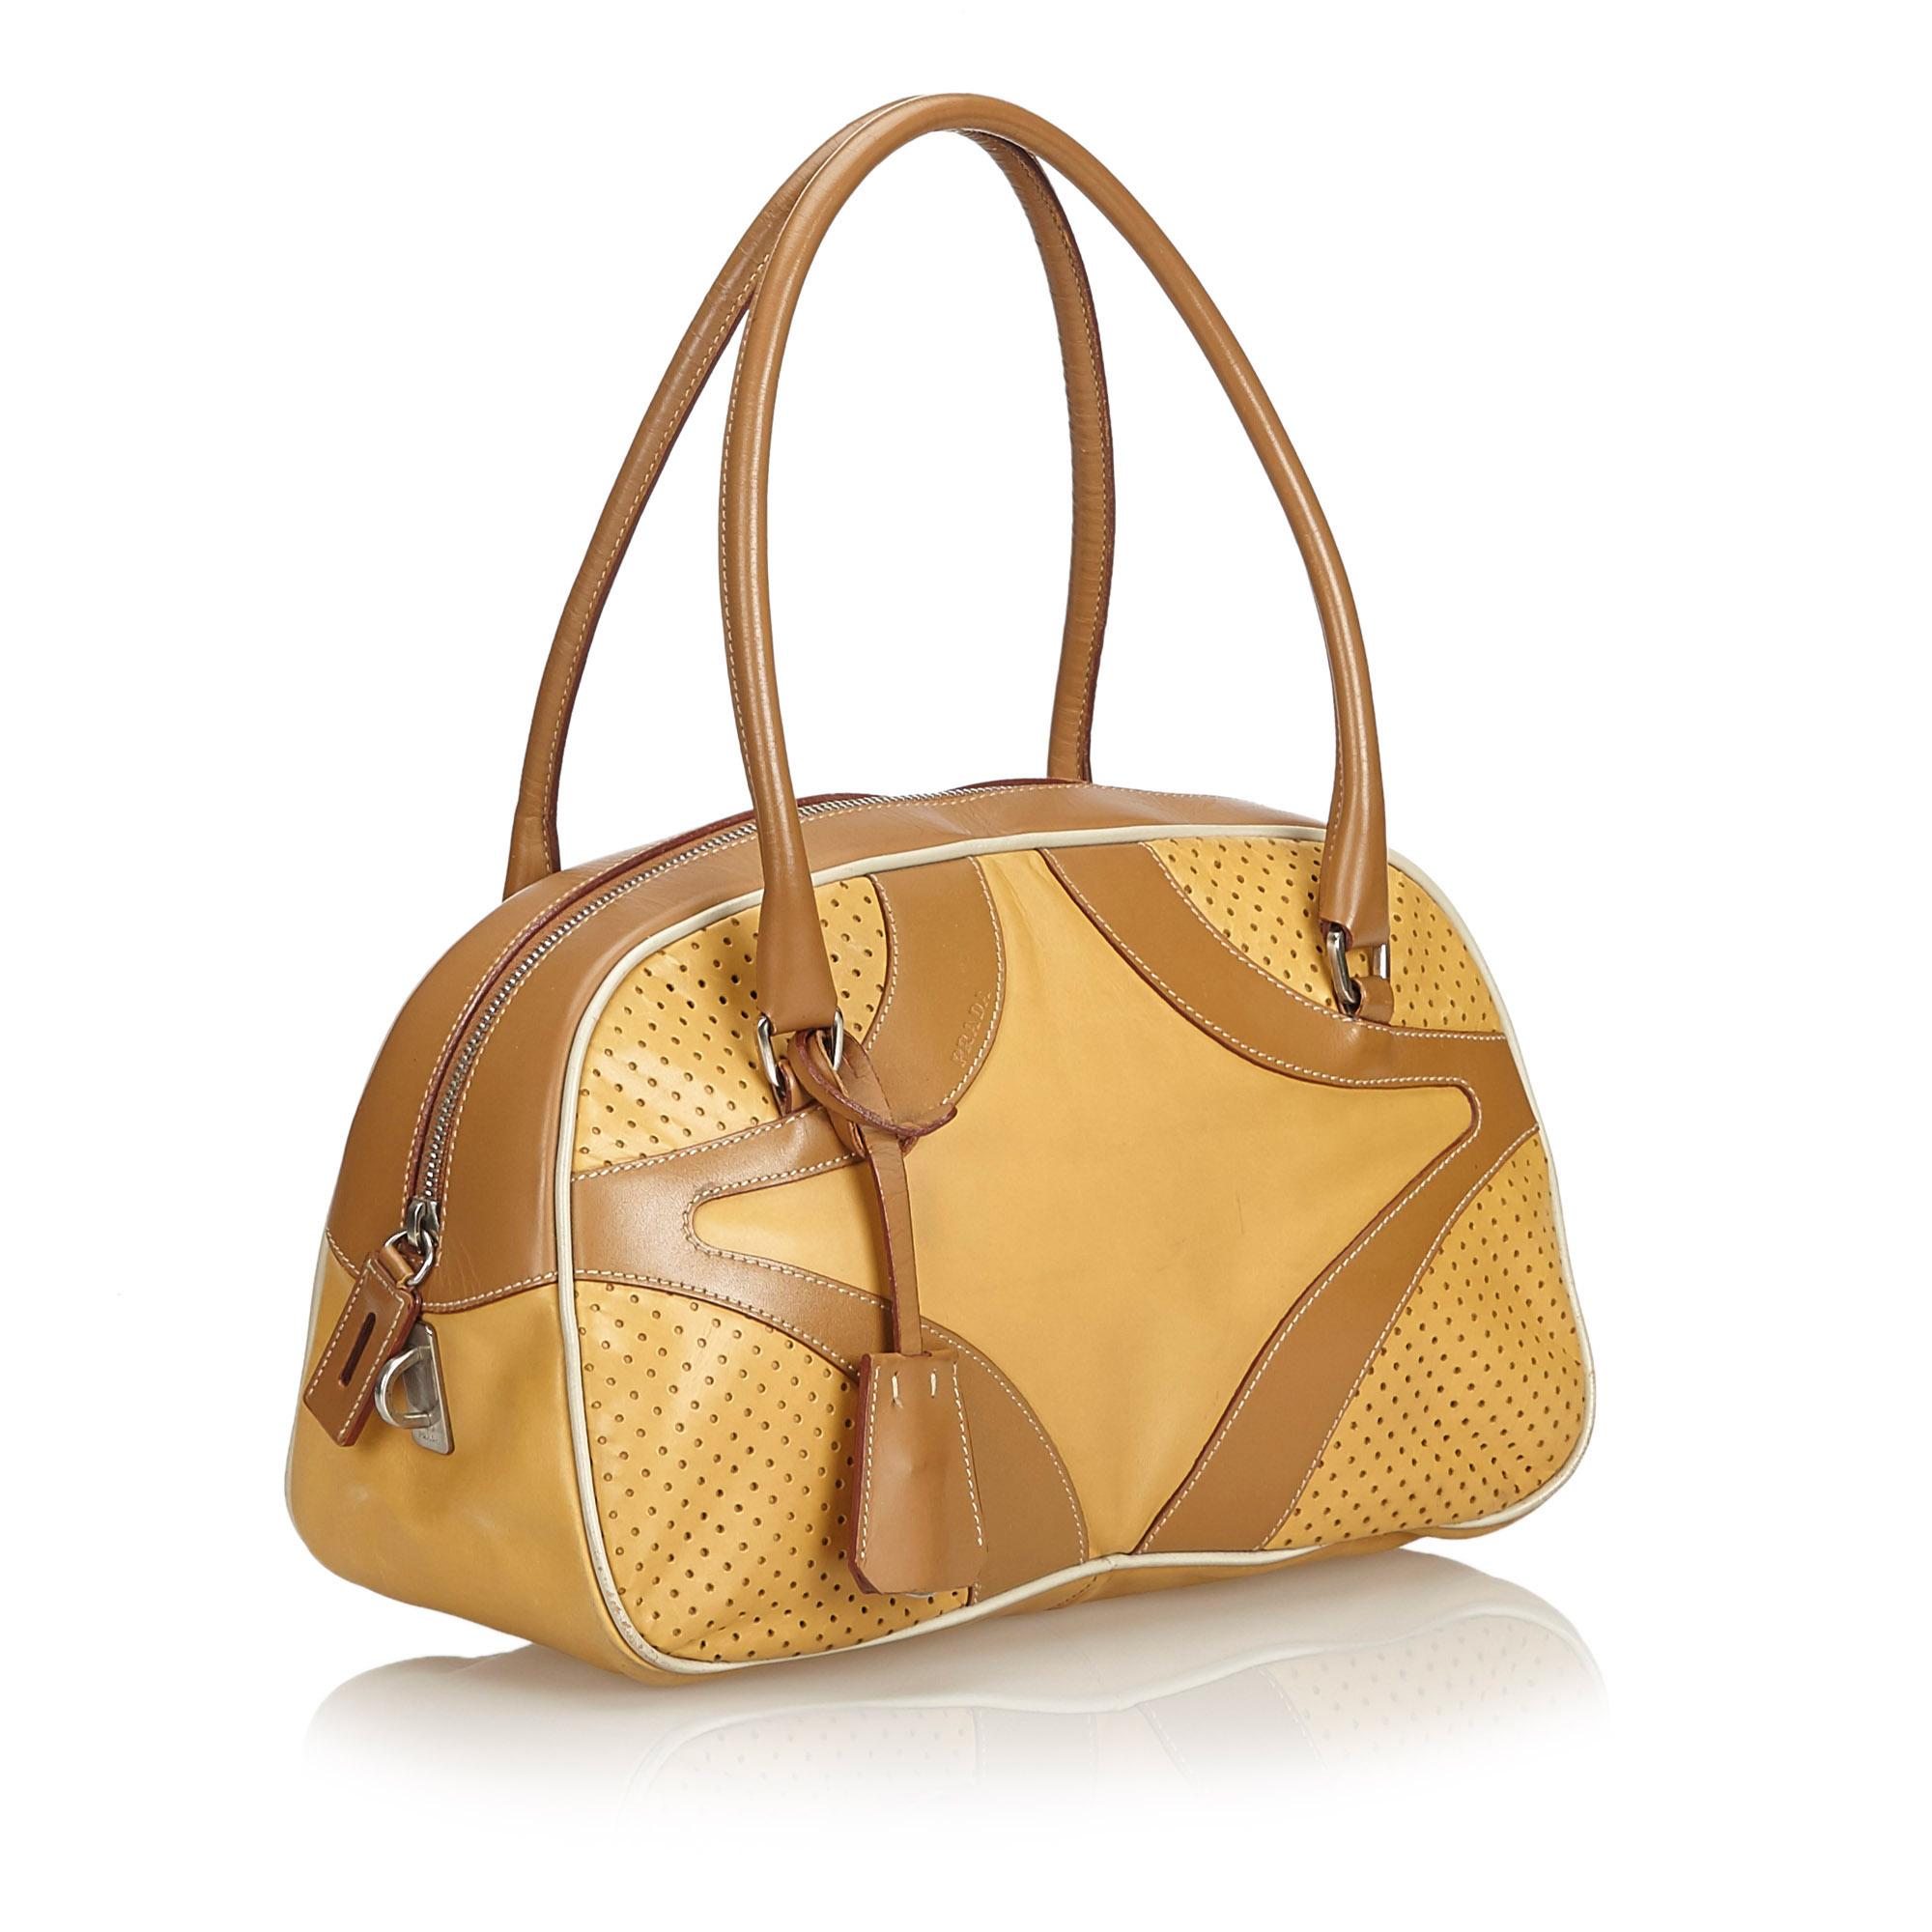 This handbag features a perforated leather body, rolled handles, a top zip closure, and an interior zip pocket. It carries as B condition rating.

Inclusions: 
Dust Bag

Dimensions:
Length: 18.00 cm
Width: 33.00 cm
Depth: 11.00 cm
Hand Drop: 16.00